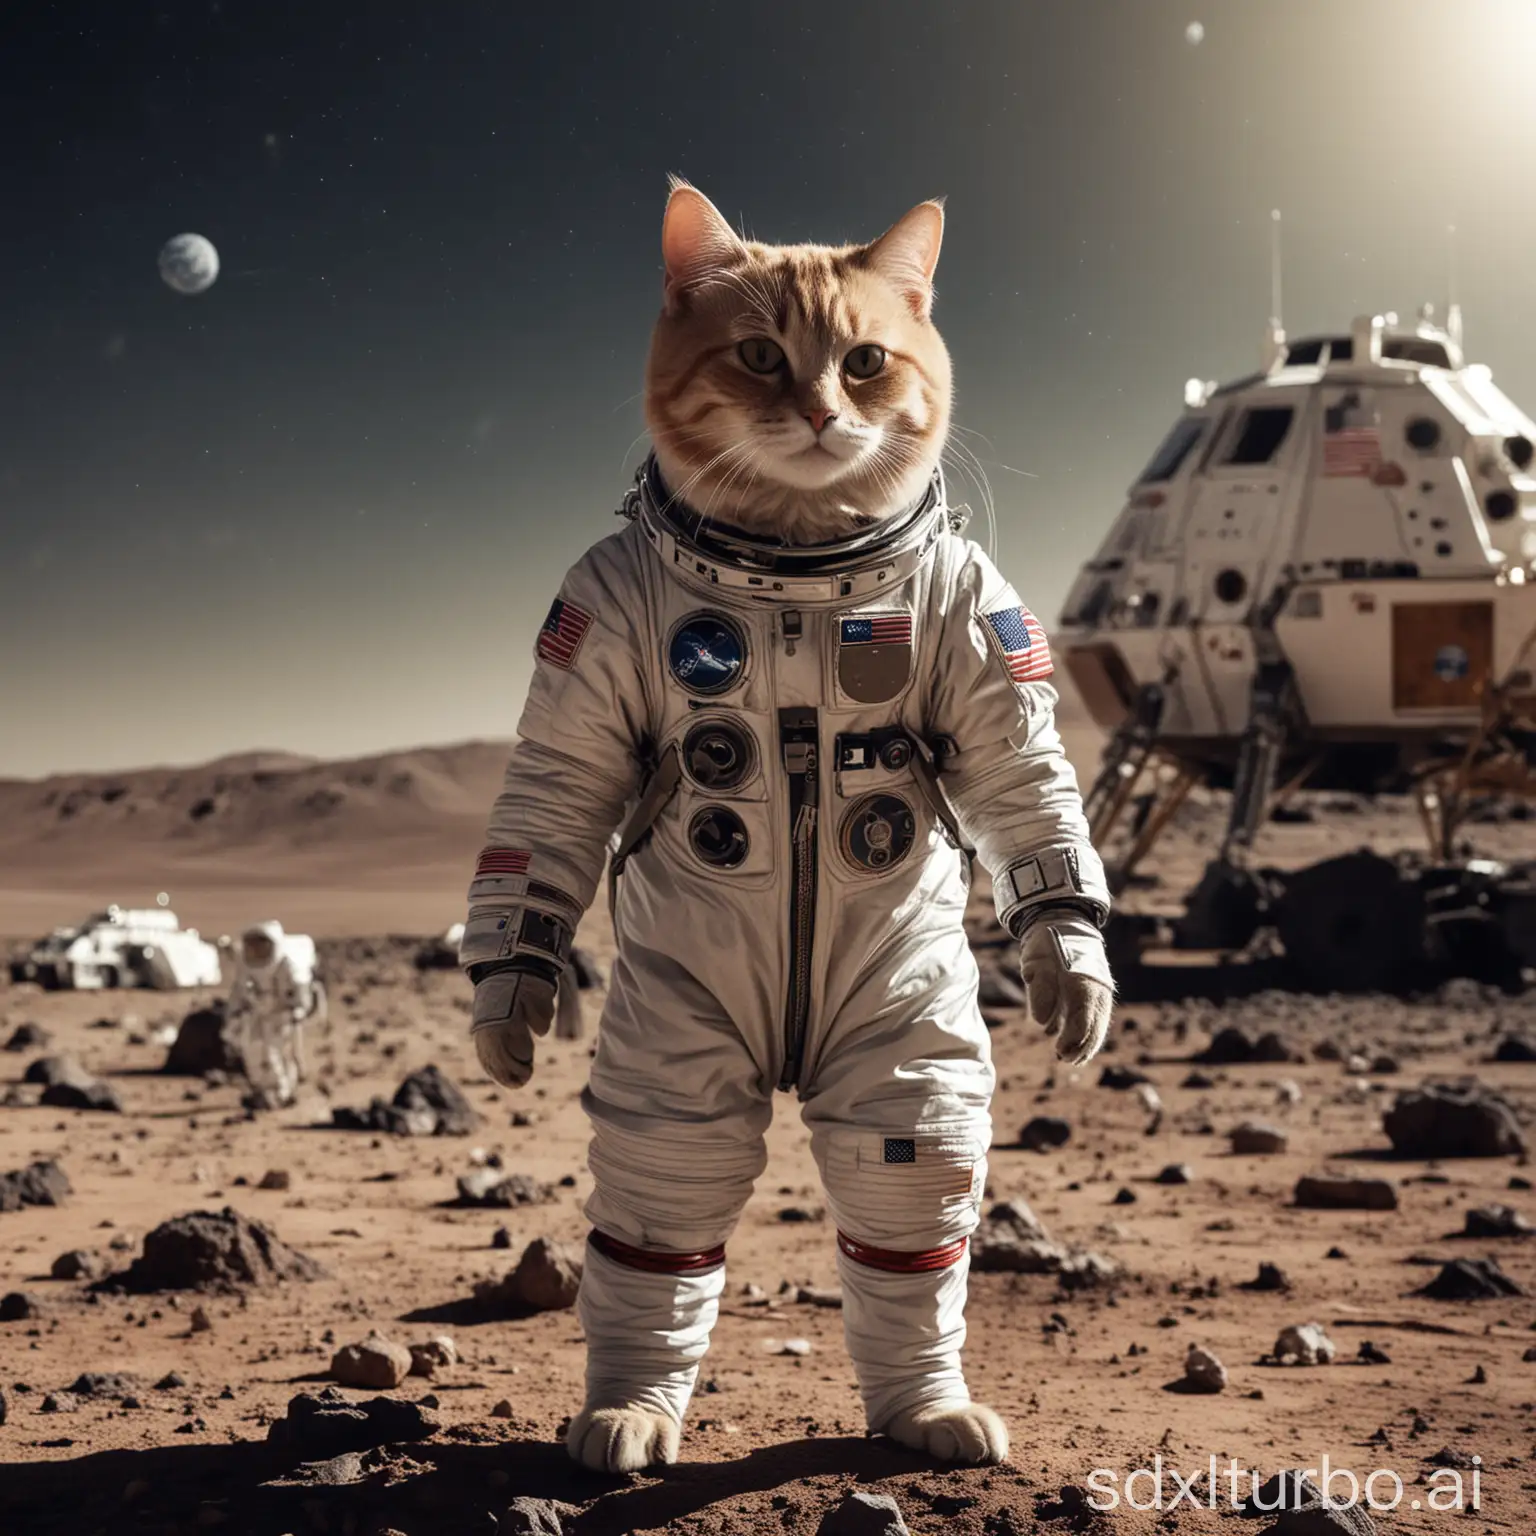 A cat with a spacesuit is standing in front of a spacecraft, on the moon, meteor crater